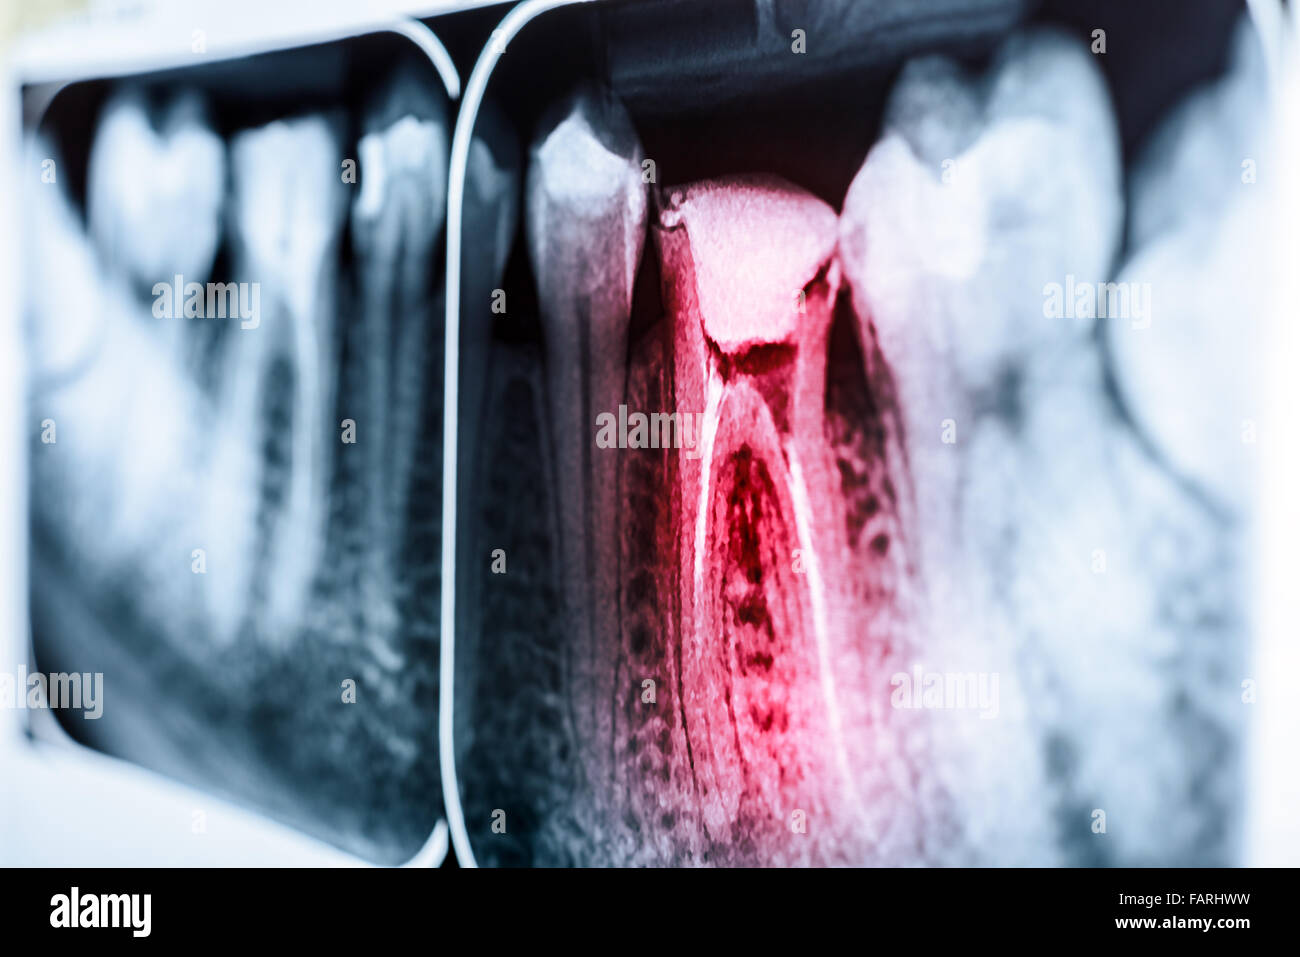 Pain Of Tooth Decay On Teeth X-Ray Stock Photo